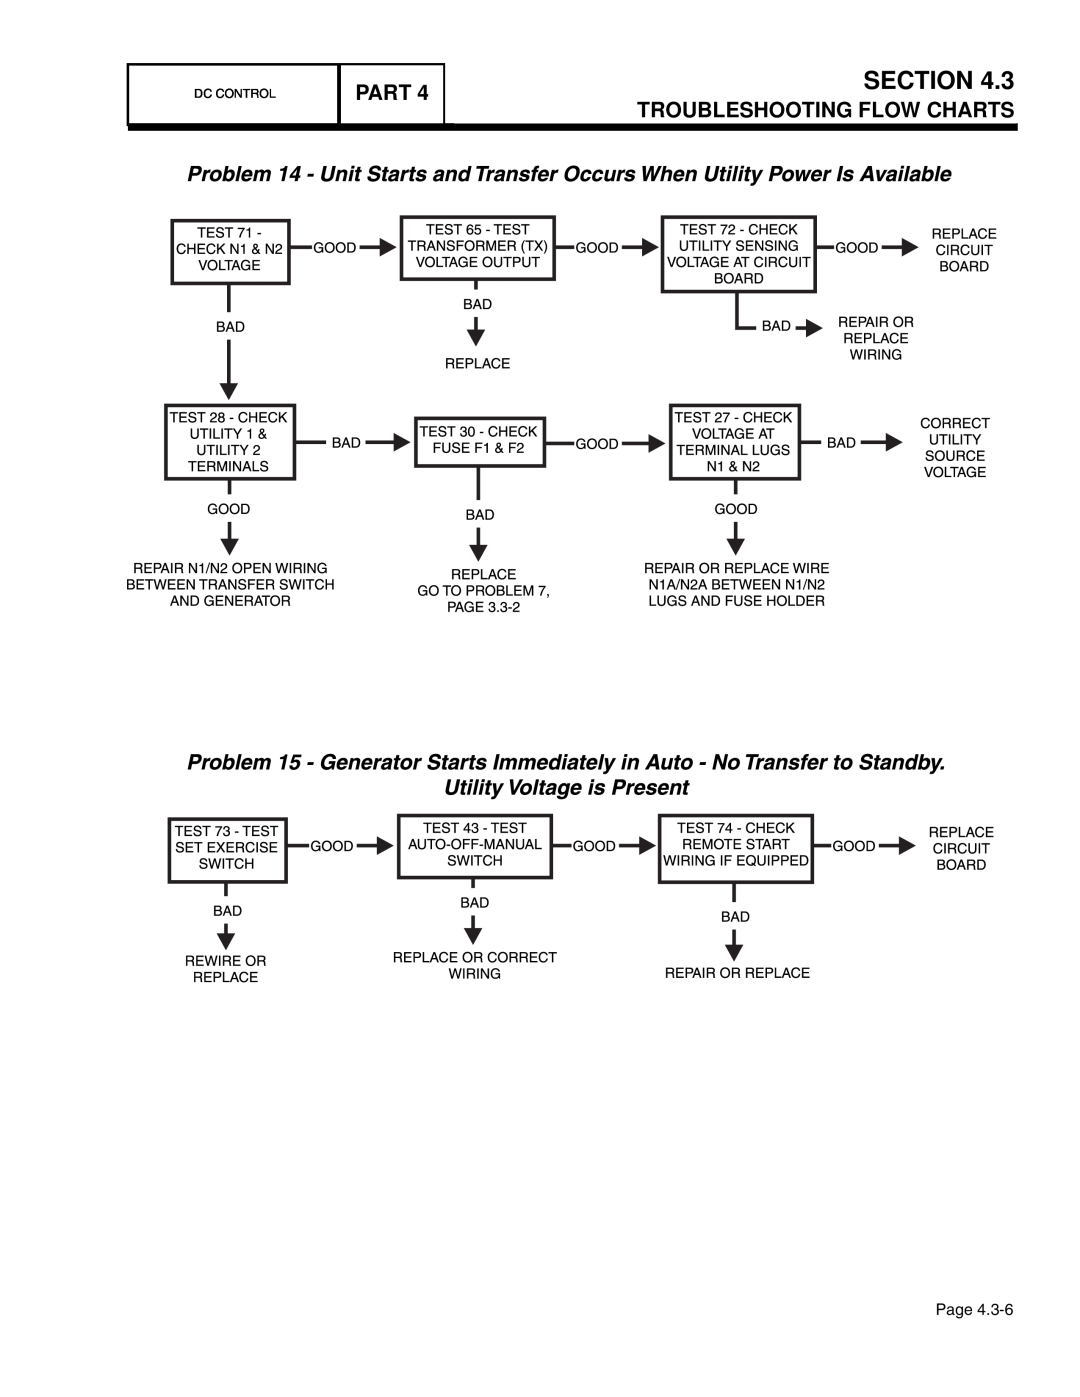 Guardian Technologies 4456, 4390, 4389, 4760, 4759, 4758 manual Section, Part, Troubleshooting Flow Charts, Dc Control 